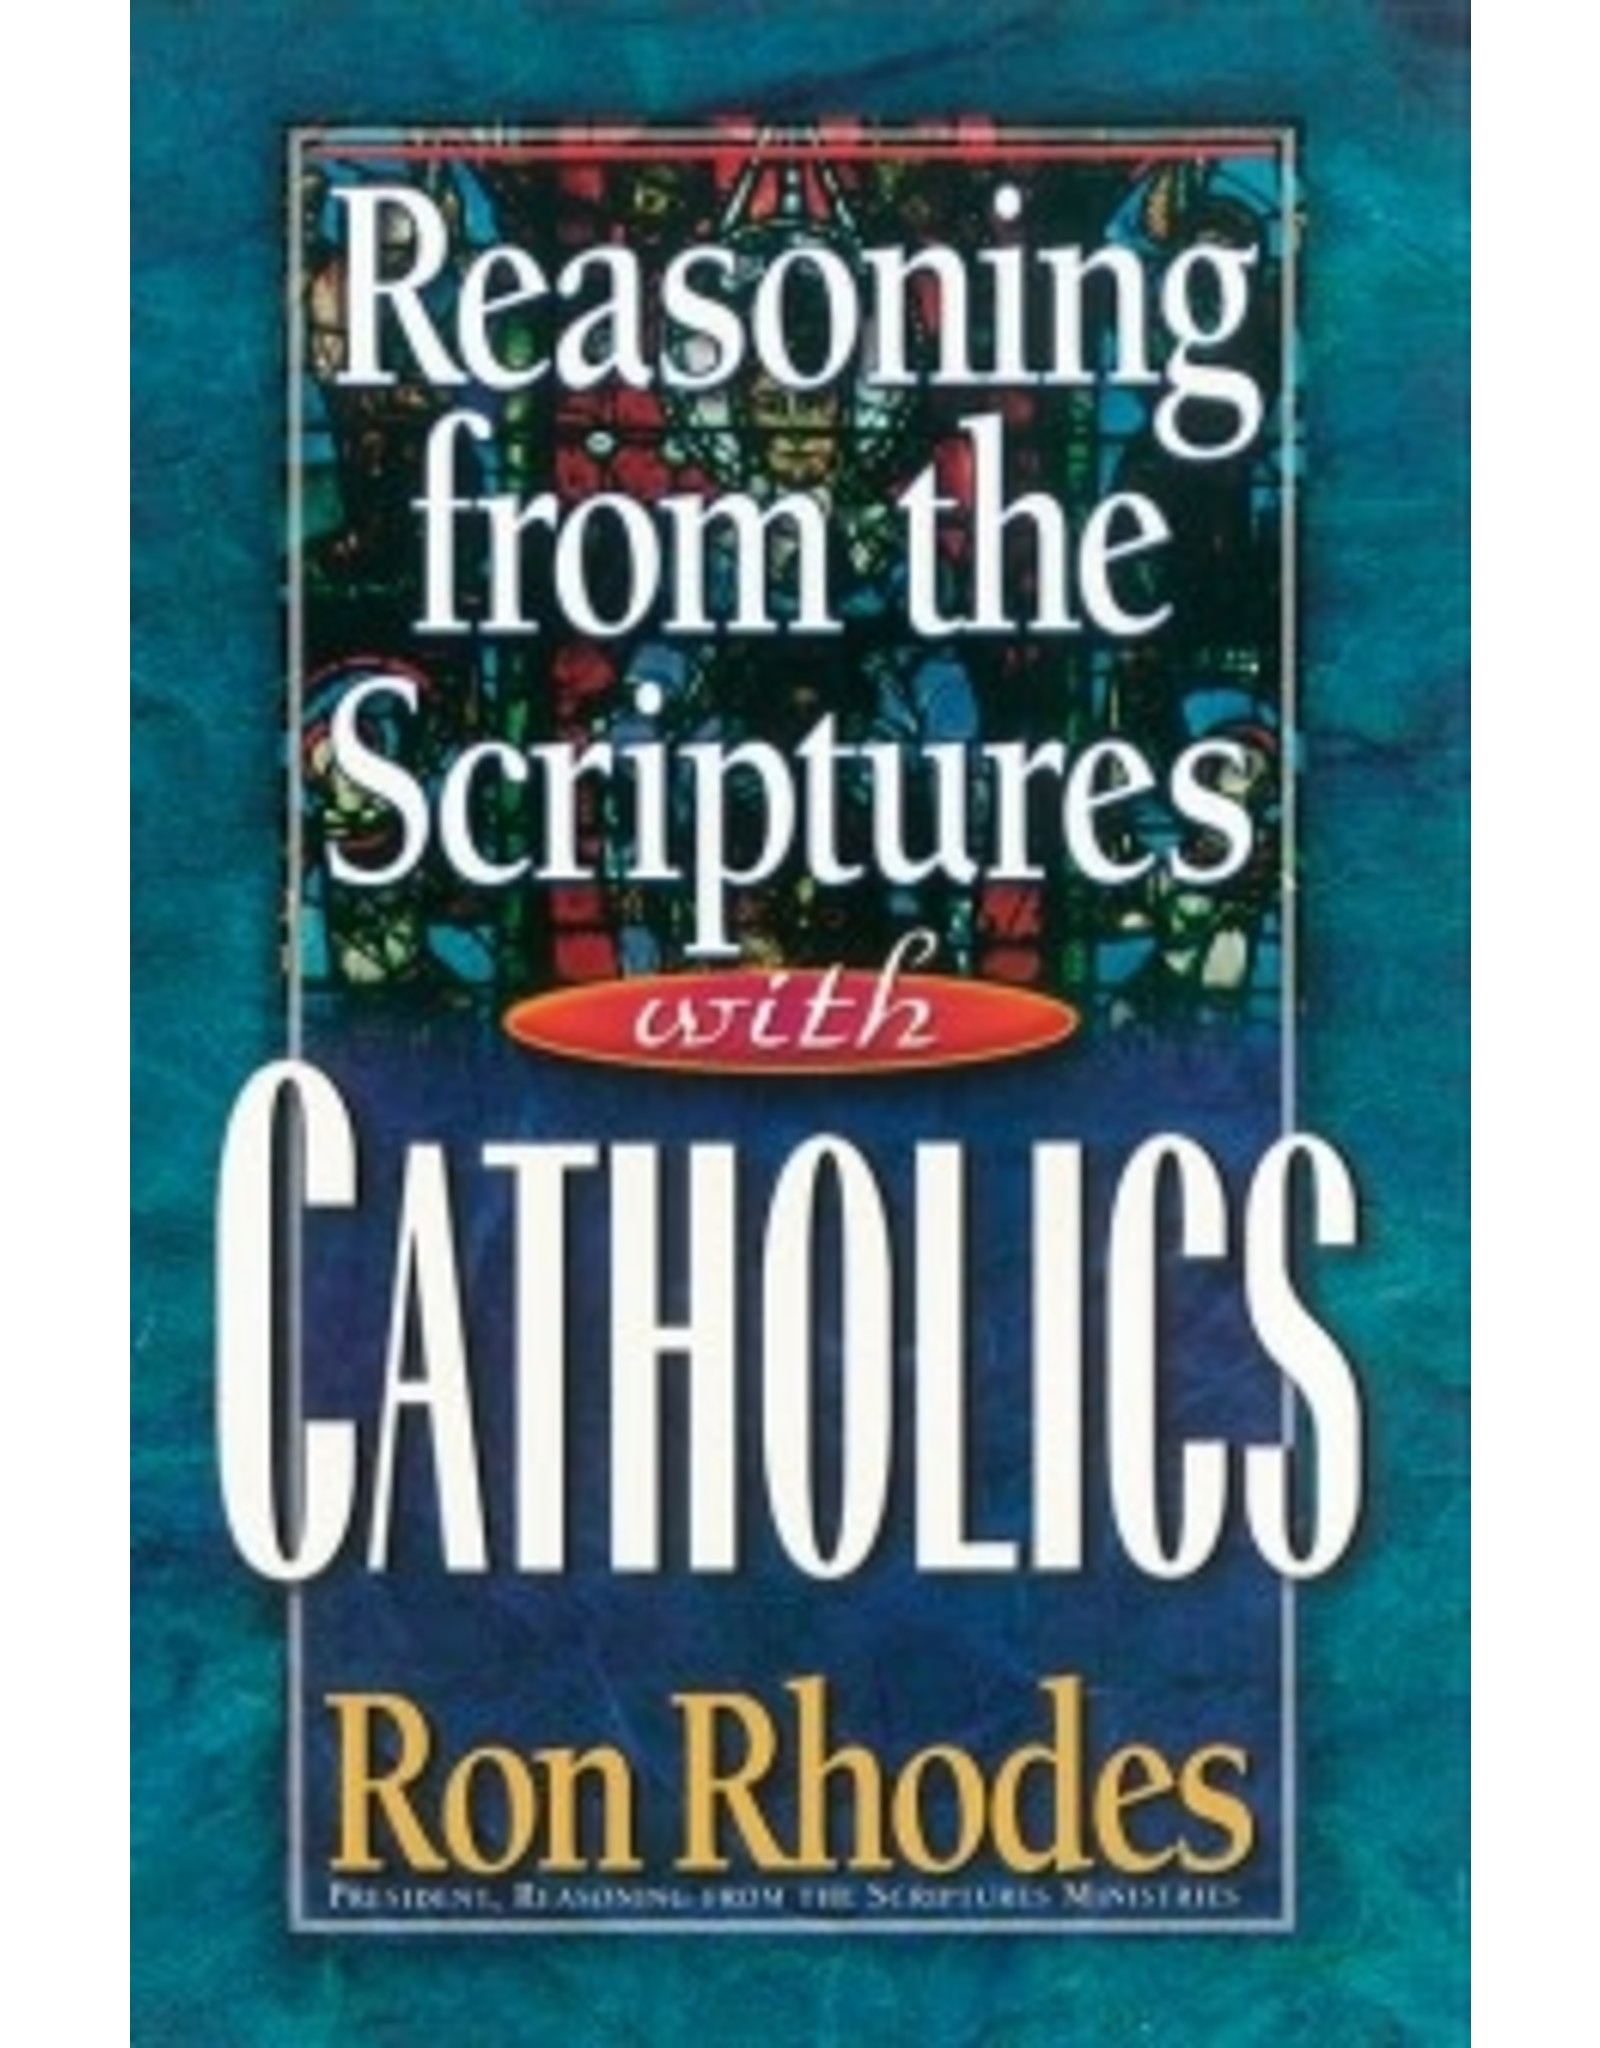 Ron Rhodes Reasoning from the Scriptures with Catholics